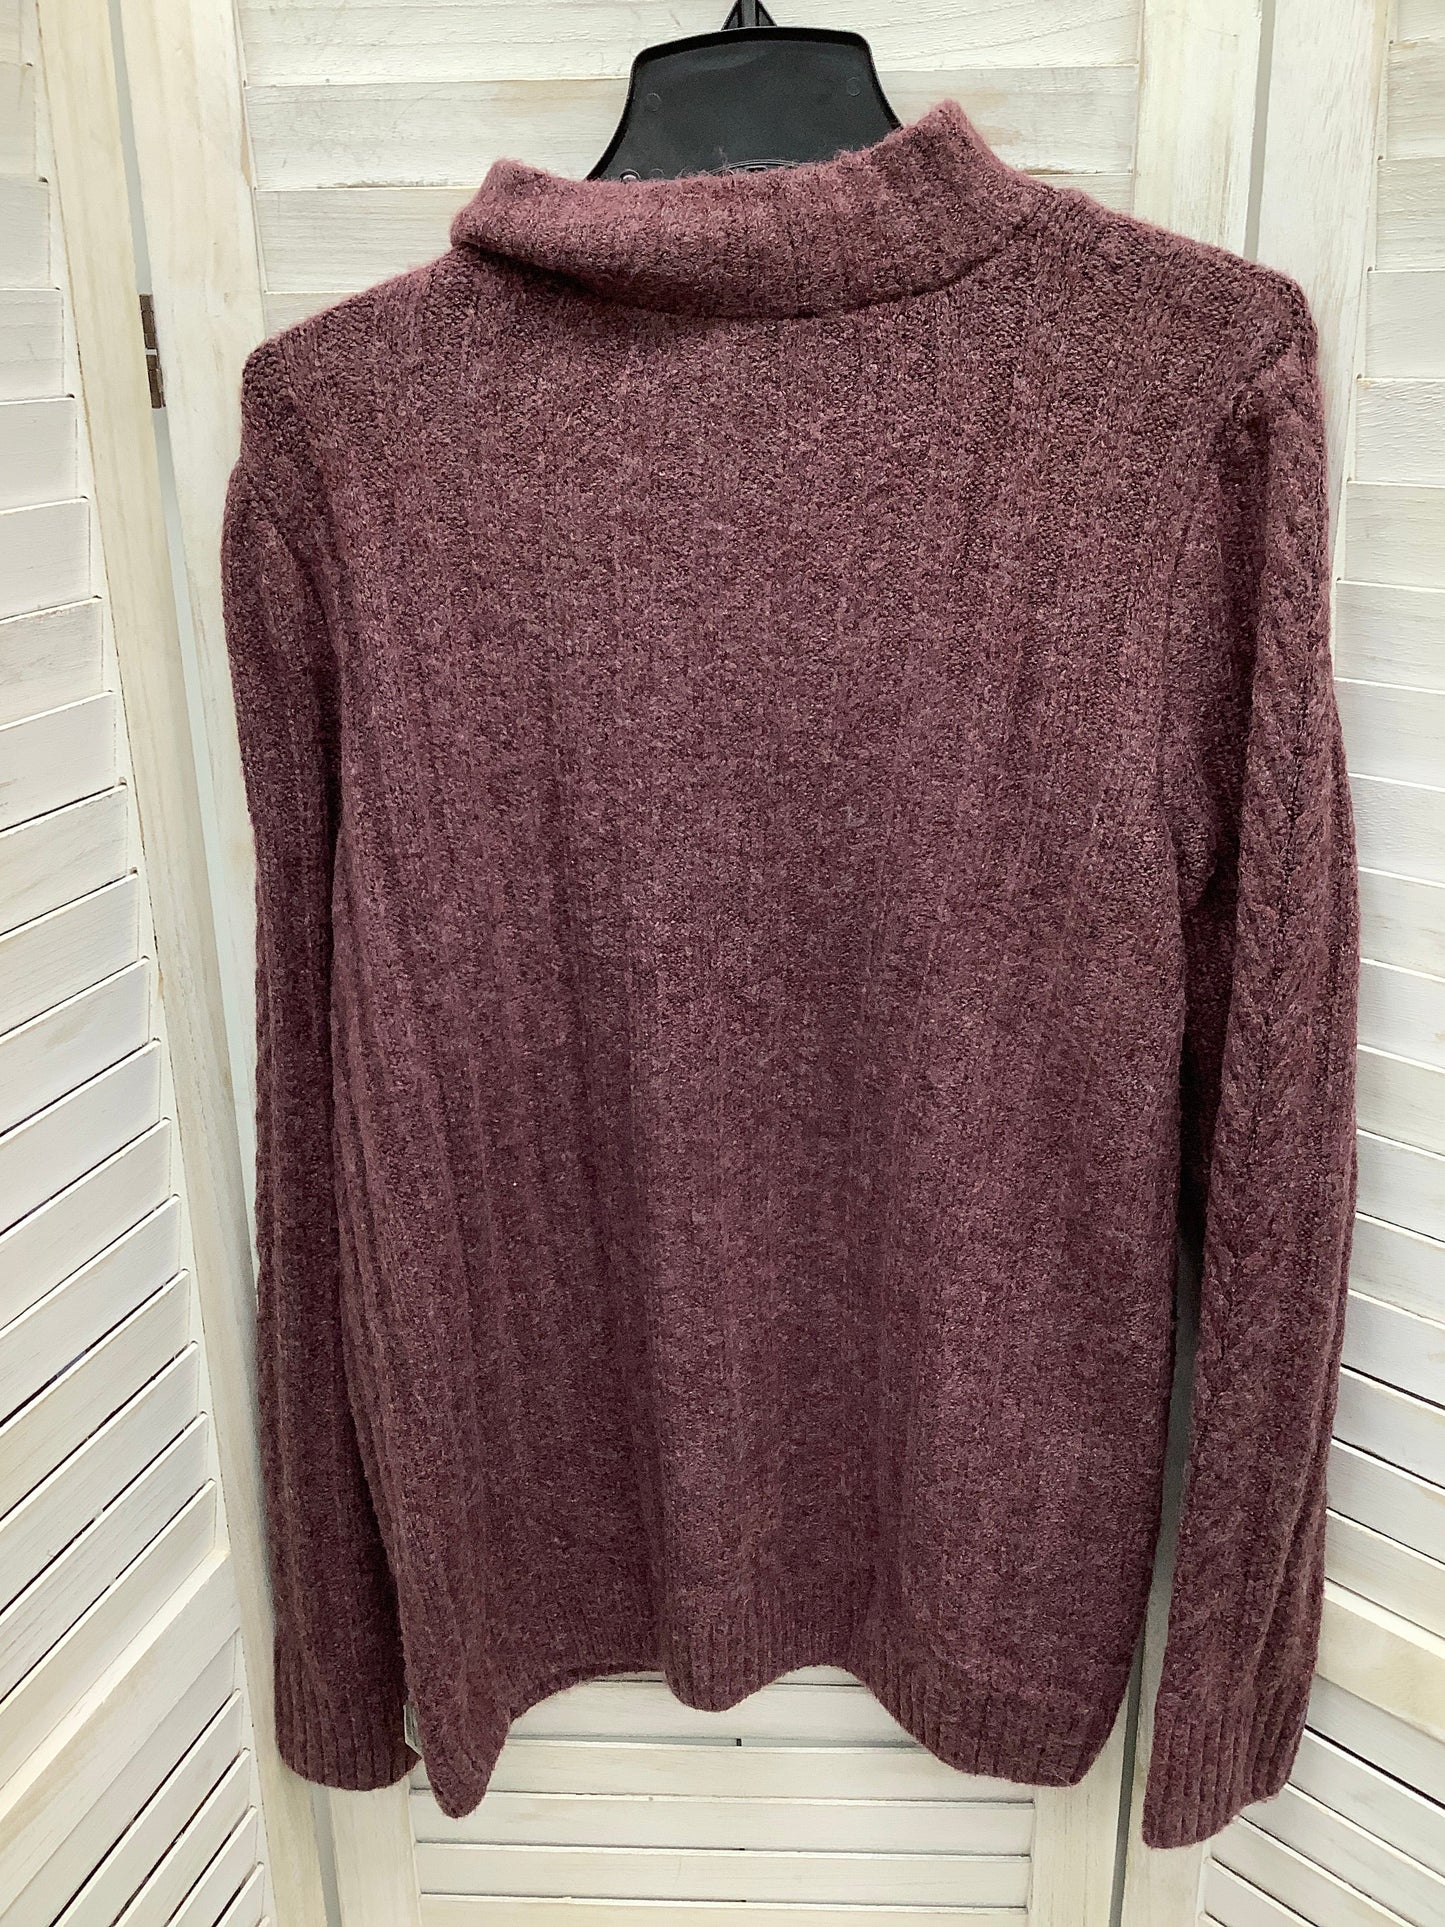 Sweater By Croft And Barrow  Size: Xl